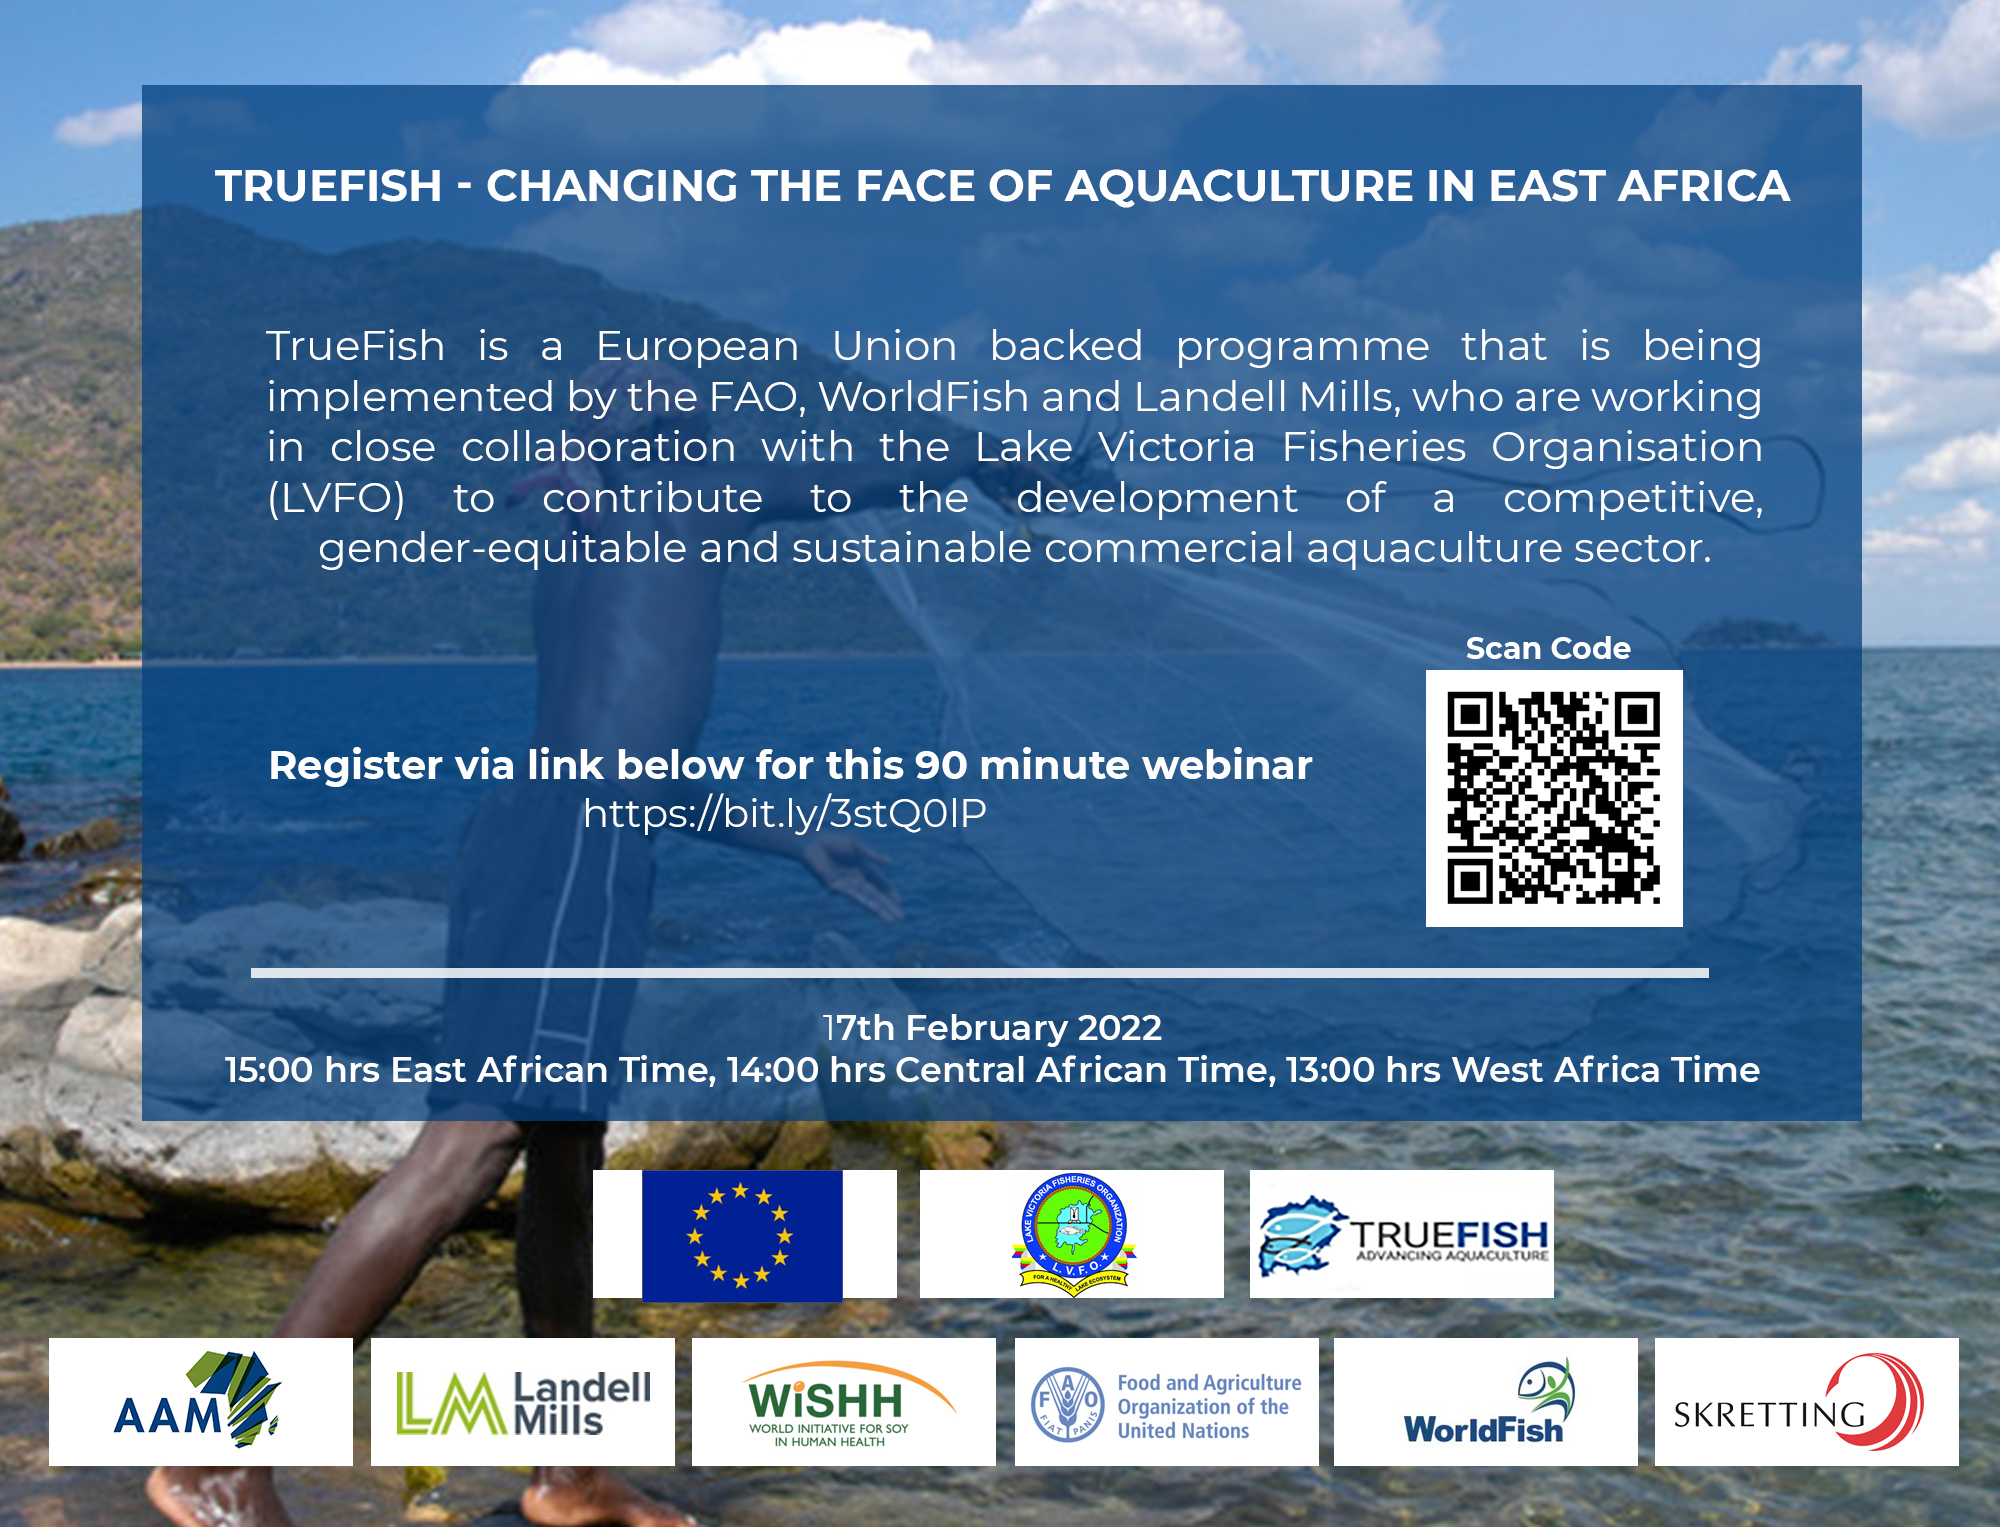 TrueFish - Changing the face of aquaculture in East Africa